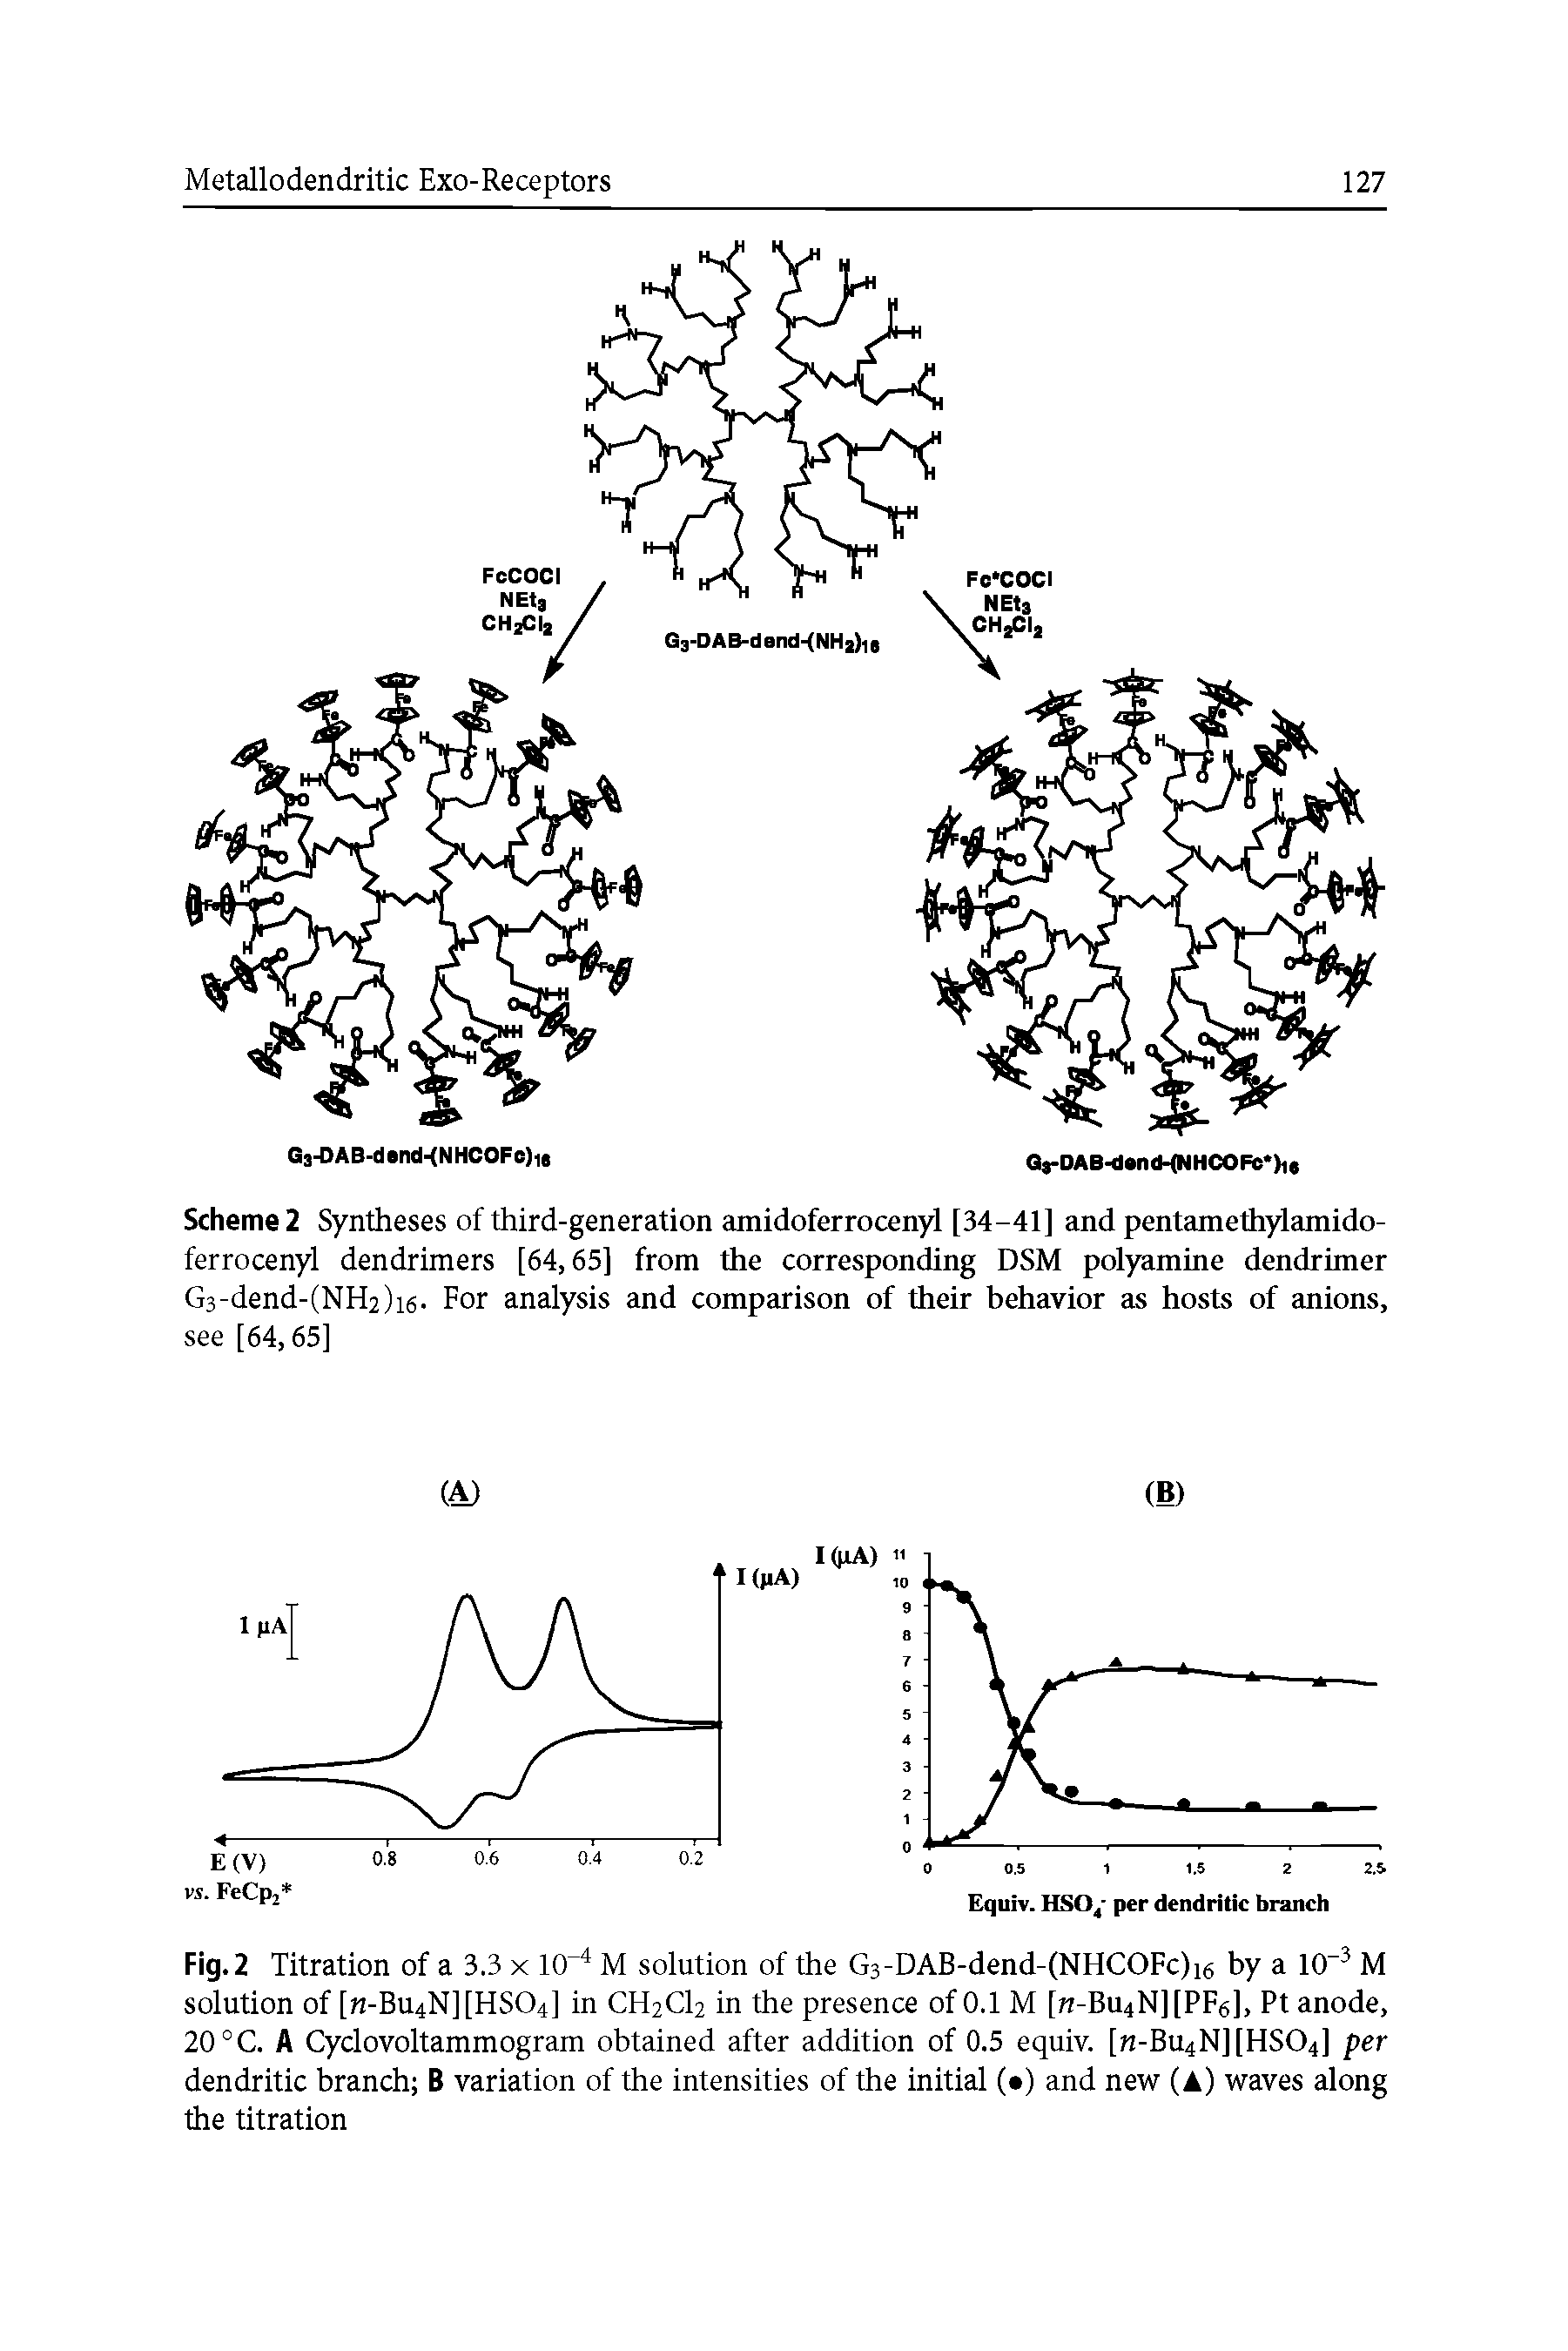 Scheme 2 Syntheses of third-generation amidoferrocenyl [34-41] and pentamethylamido-ferrocenyl dendrimers [64,65] from the corresponding DSM polyamine dendrimer G3-dend-(NH2)i6- For analysis and comparison of their behavior as hosts of anions, see [64,65]...